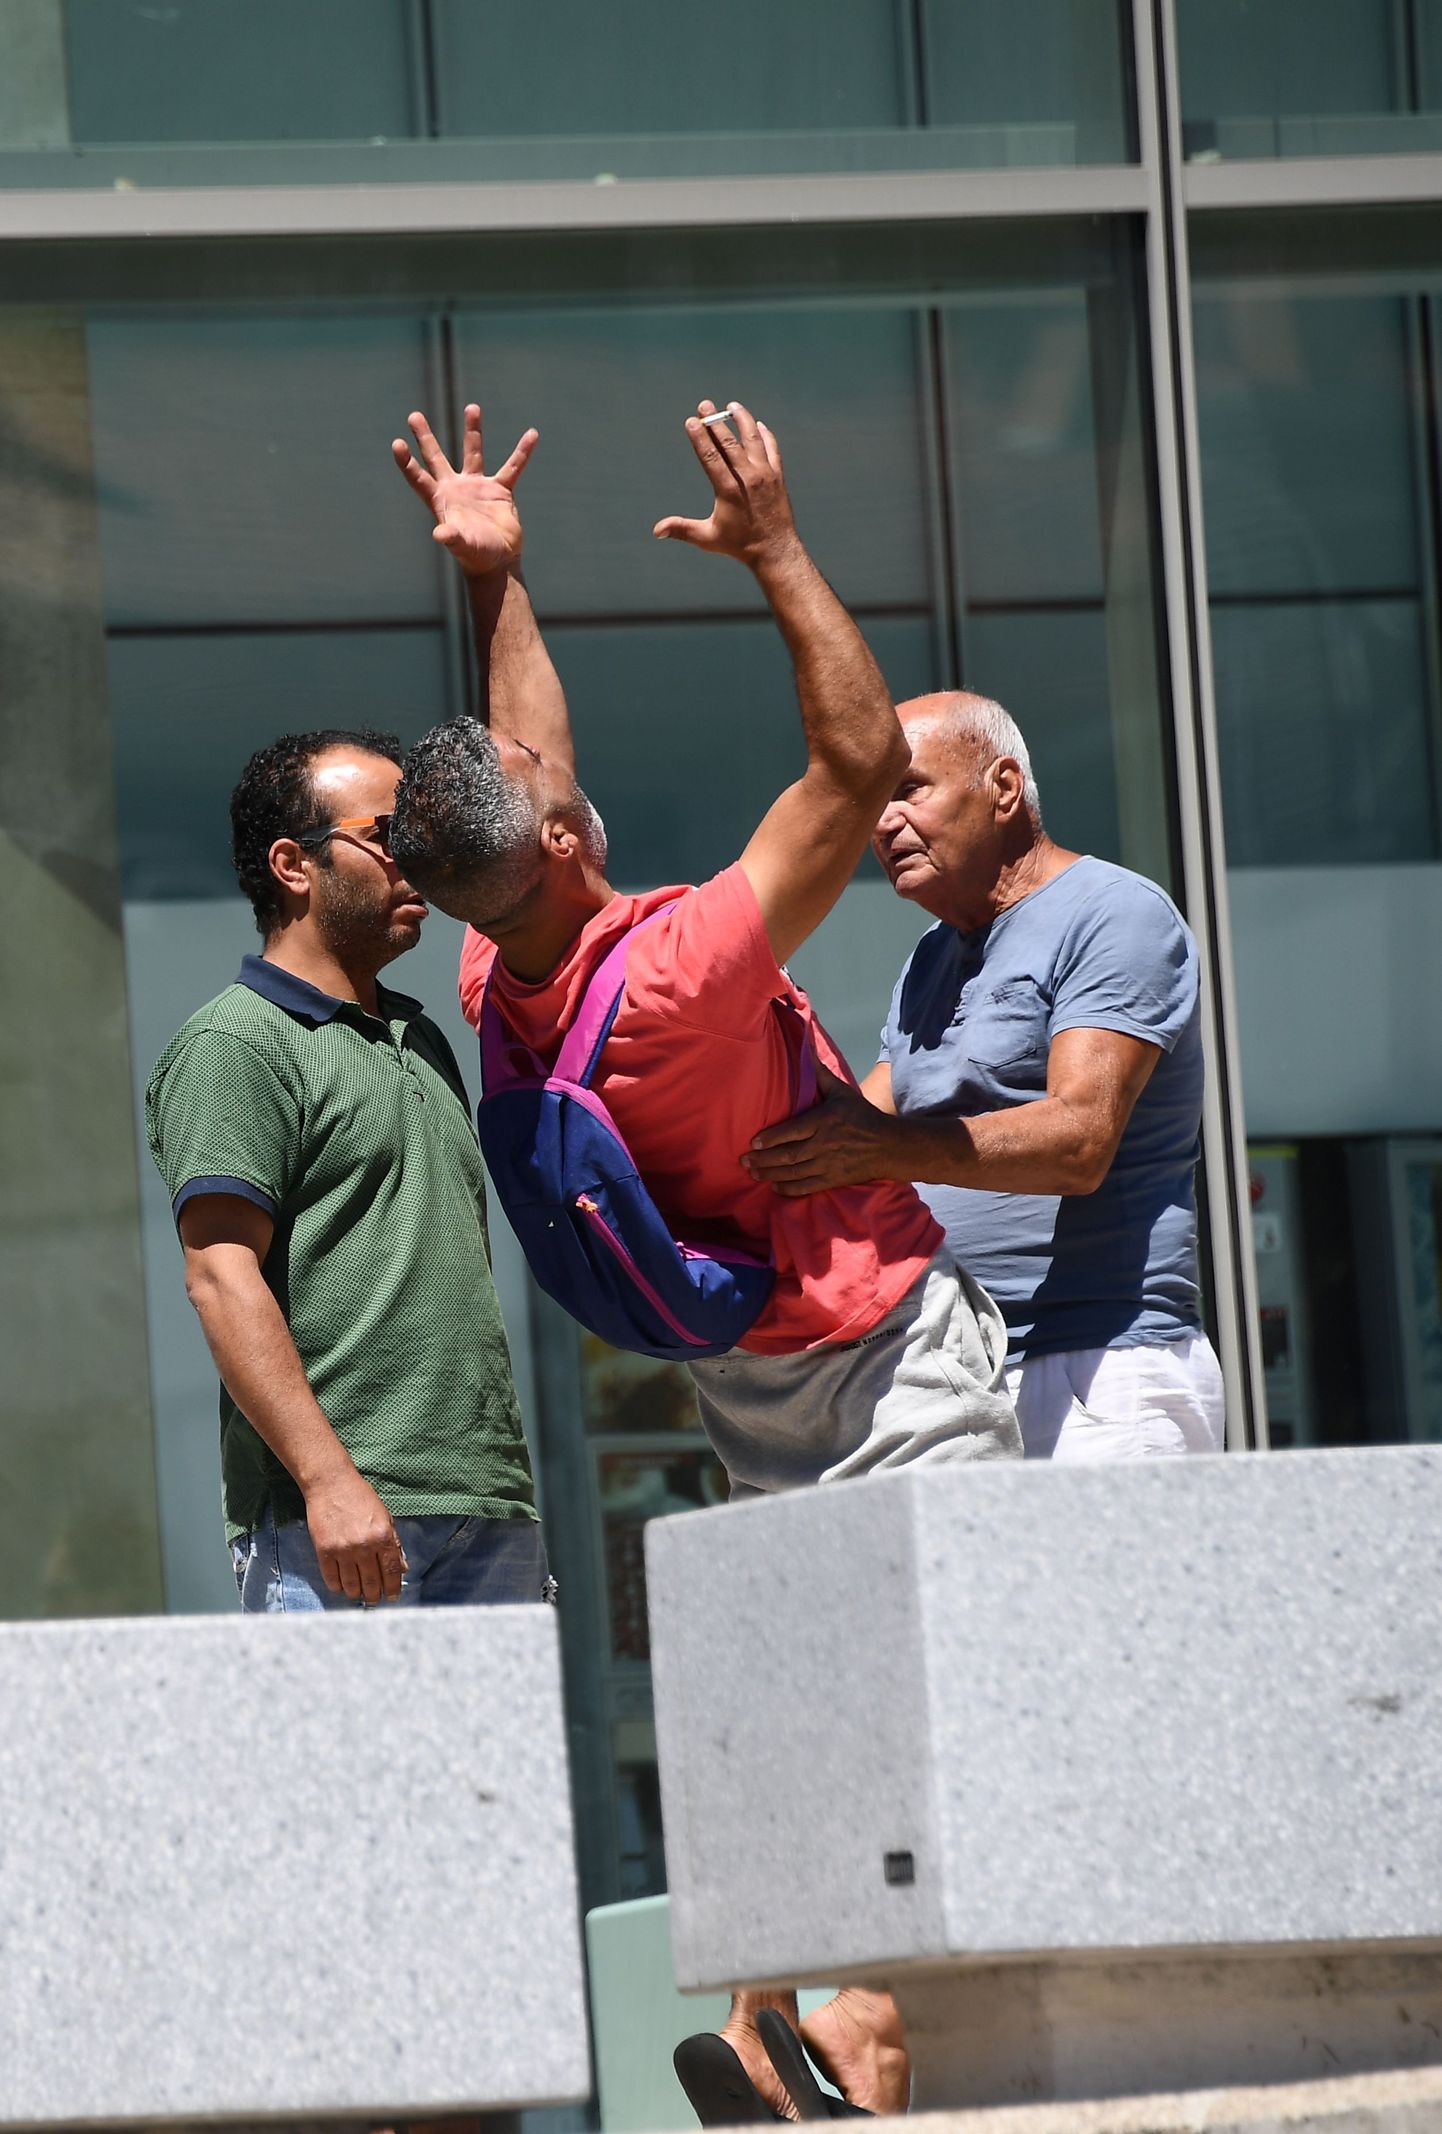 Tahar Mejri (C), who lost his wife during the deadly Nice attack that left 84 dead on Bastille day, yells in front of the Pasteur hospital in the French riviera town of Nice after he found out the death of his son on July 16, 2016.
The Islamic State group claimed responsibility for the truck attack that killed 84 people in Nice on France's national holiday, a news service affiliated with the jihadists said Saturday. Tunisian Mohamed Lahouaiej-Bouhlel, 31, smashed a 19-tonne truck into a packed crowd of people in the Riviera city celebrating Bastille Day -- France's national day. / AFP PHOTO / ANNE-CHRISTINE POUJOULAT